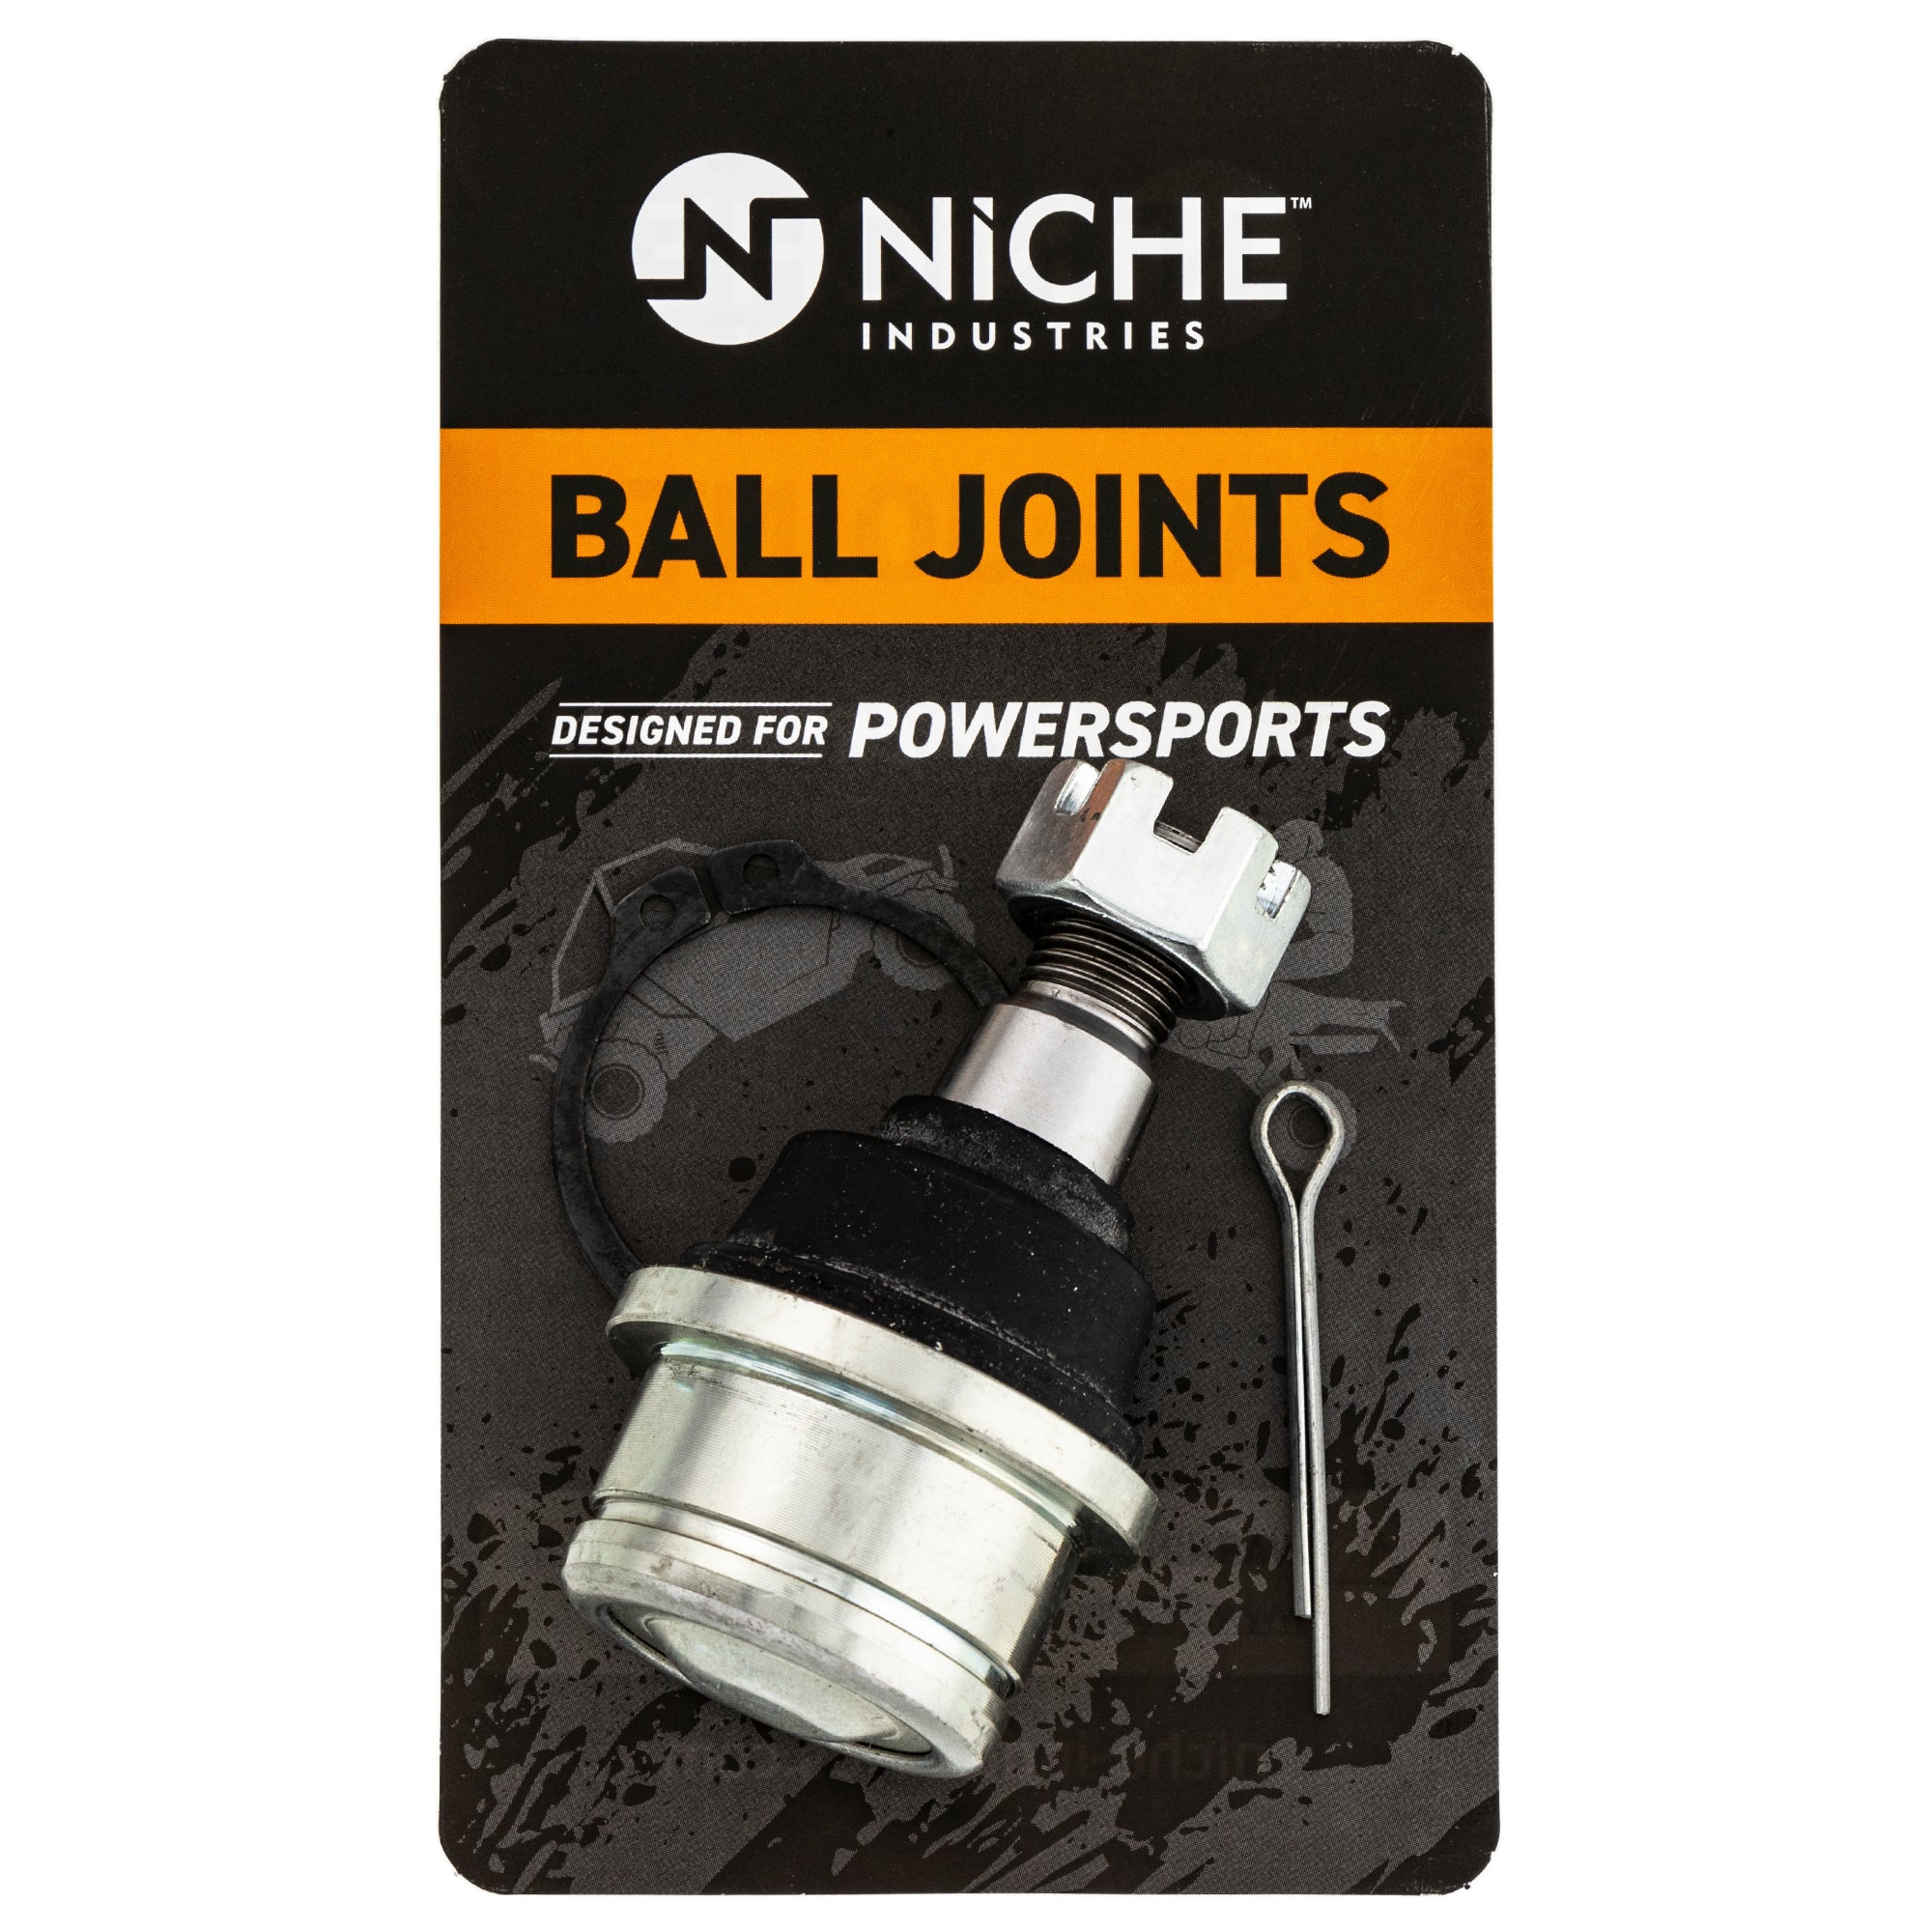 Ball Joint Upper for zOTHER Western Power Sports Honda EPI Performance Pioneer FourTrax NICHE 519-CBJ2233T